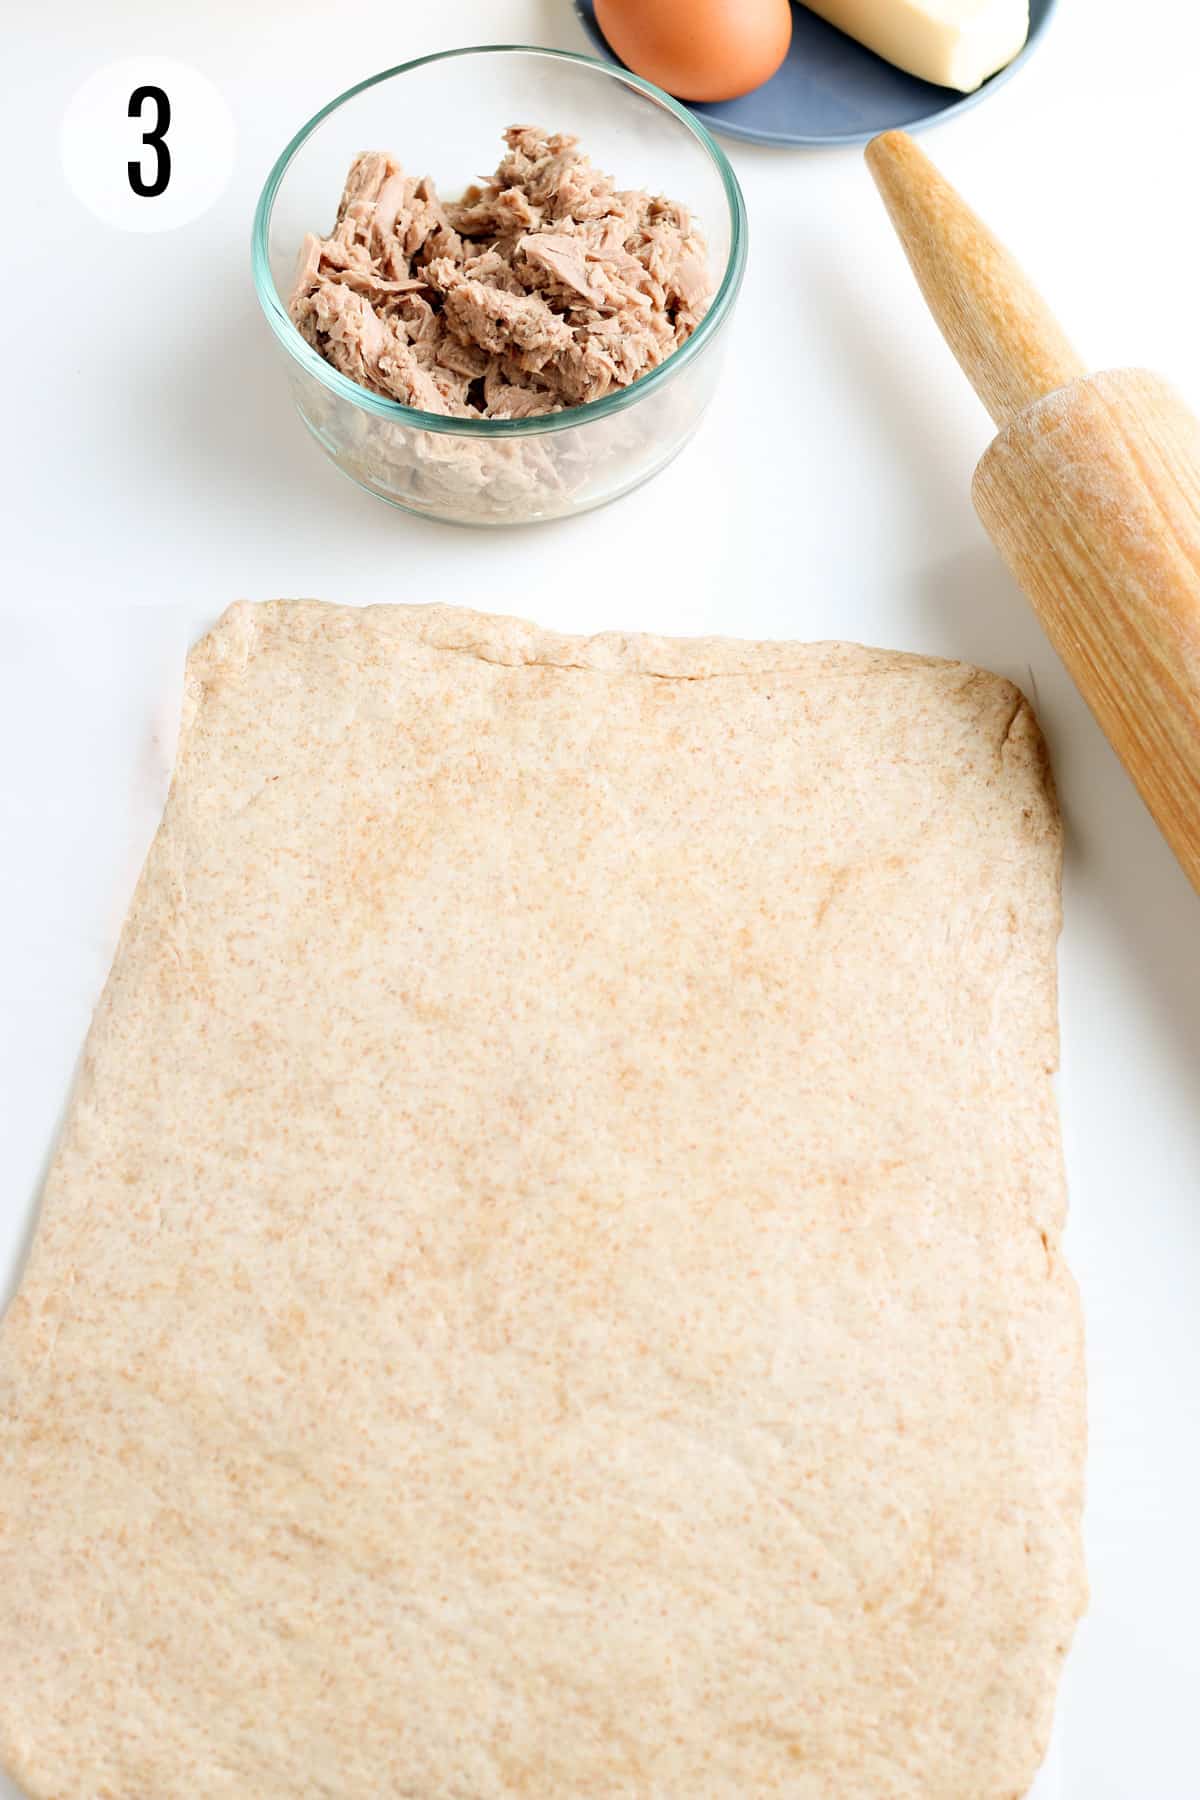 Rolled out whole wheat biscuit dough with wooden rolling pin, bowl of tuna and egg in upper and right background. 